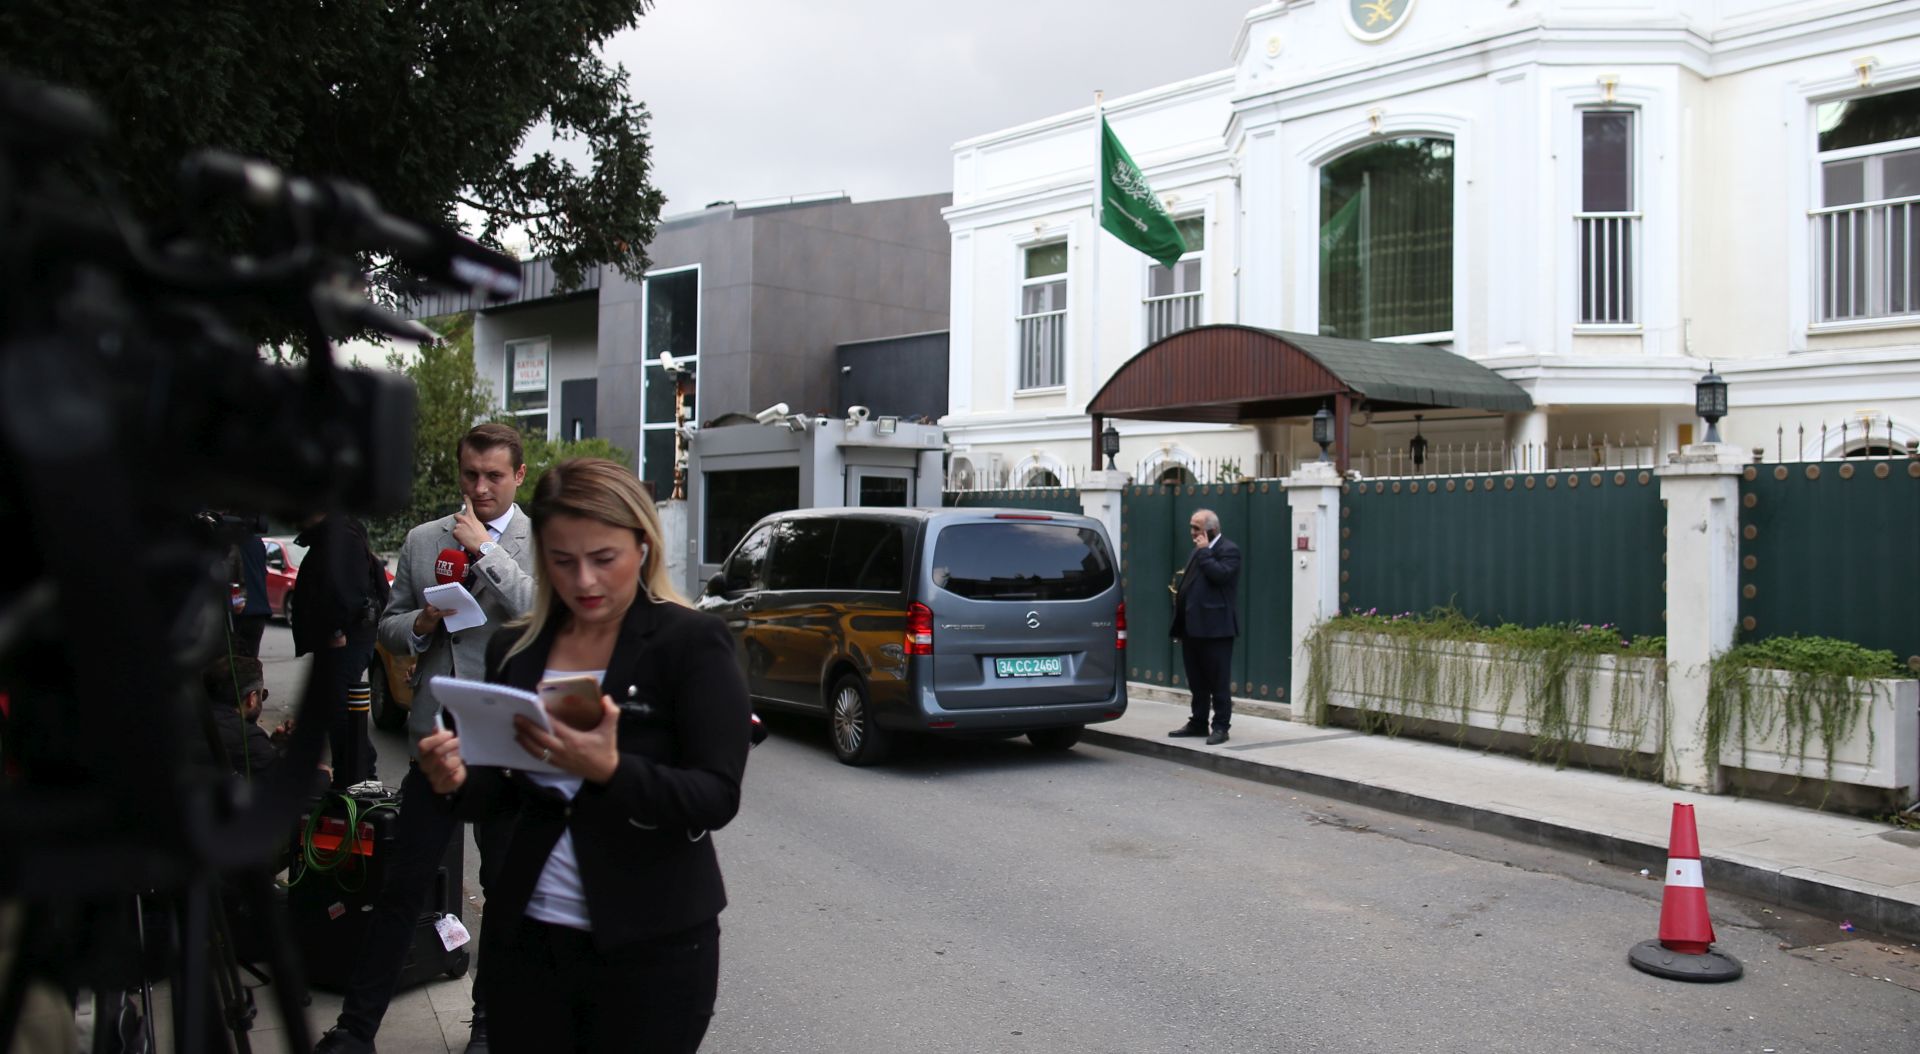 epa07096853 Journalists work in front of the residence of the Saudi consul in Istanbul, Turkey, 16 October 2018. A Turkish prosecutor on 15 October has entered the Saudi consulate in Istanbul to investigate the disappearance of dissident Saudi journalist Jamal Khashoggi, an inspection that was being carried out jointly with a Saudi team. Khashoggi went missing on 02 October when he entered the Saudi consulate to pick up paperwork.  EPA/ERDEM SAHIN